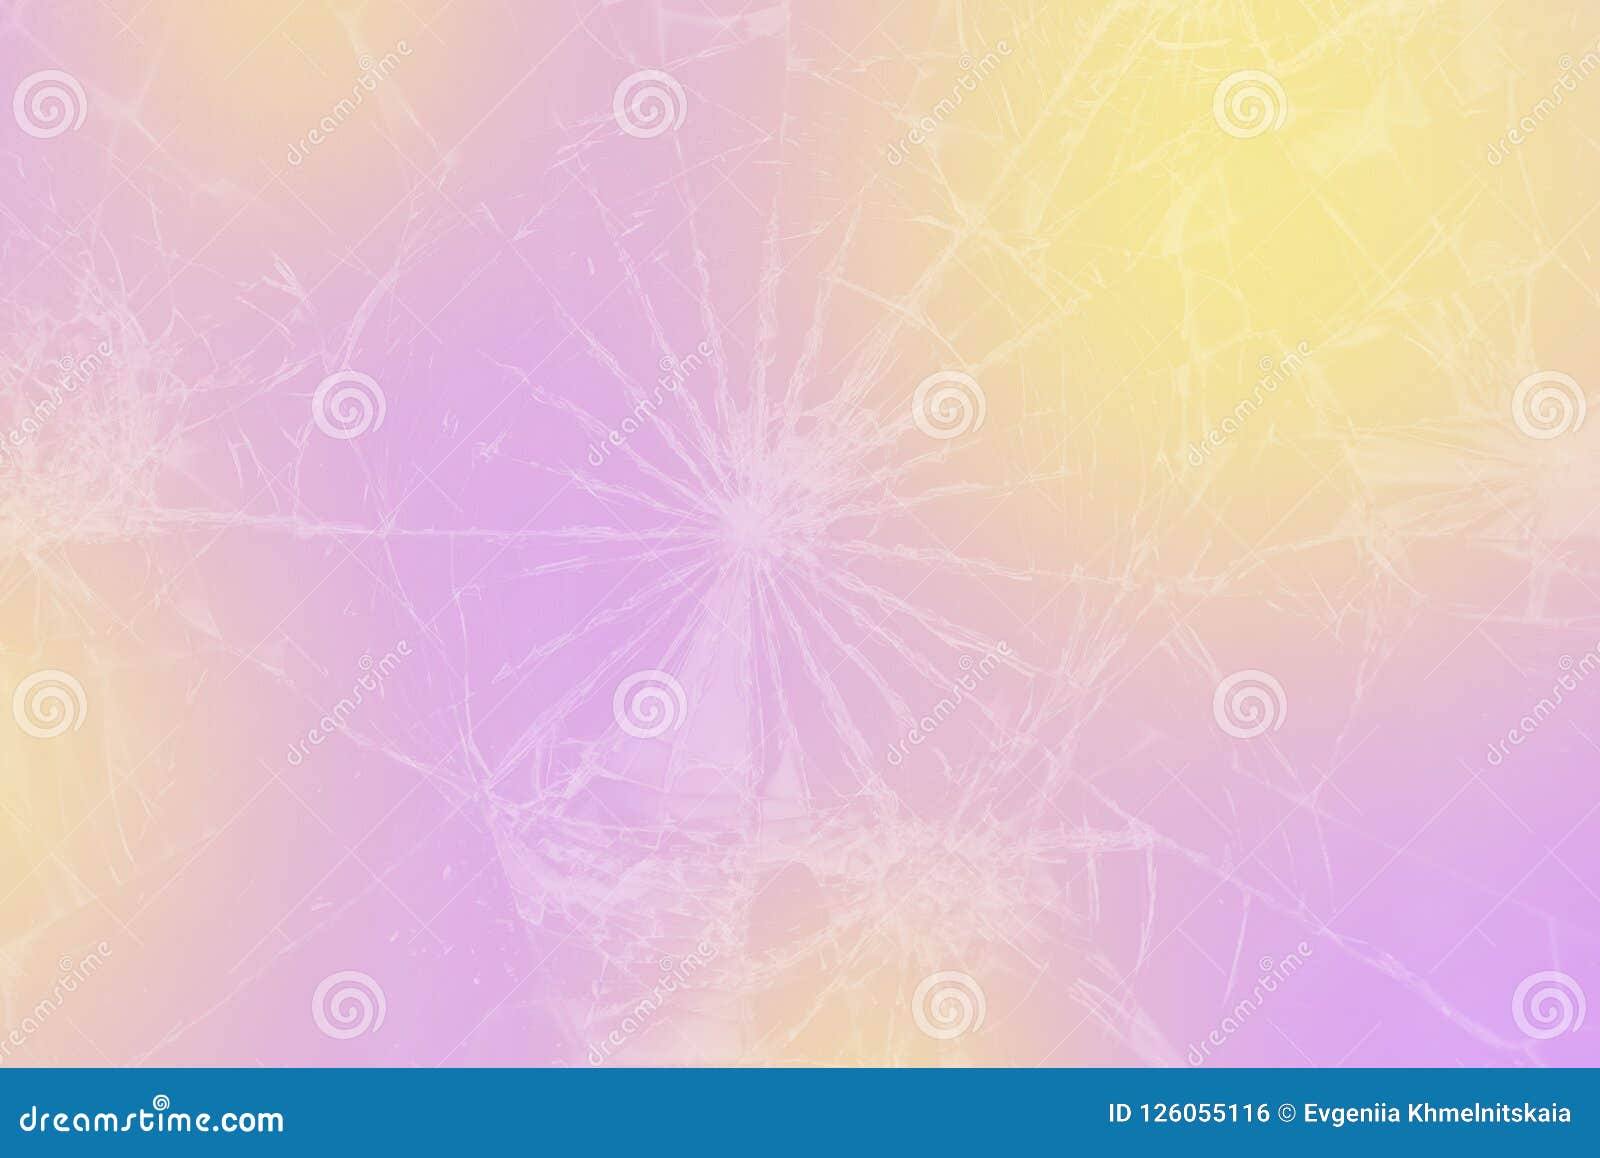 24,461 Colors Digital Background Stock Photos - Free & Royalty-Free Stock  Photos from Dreamstime